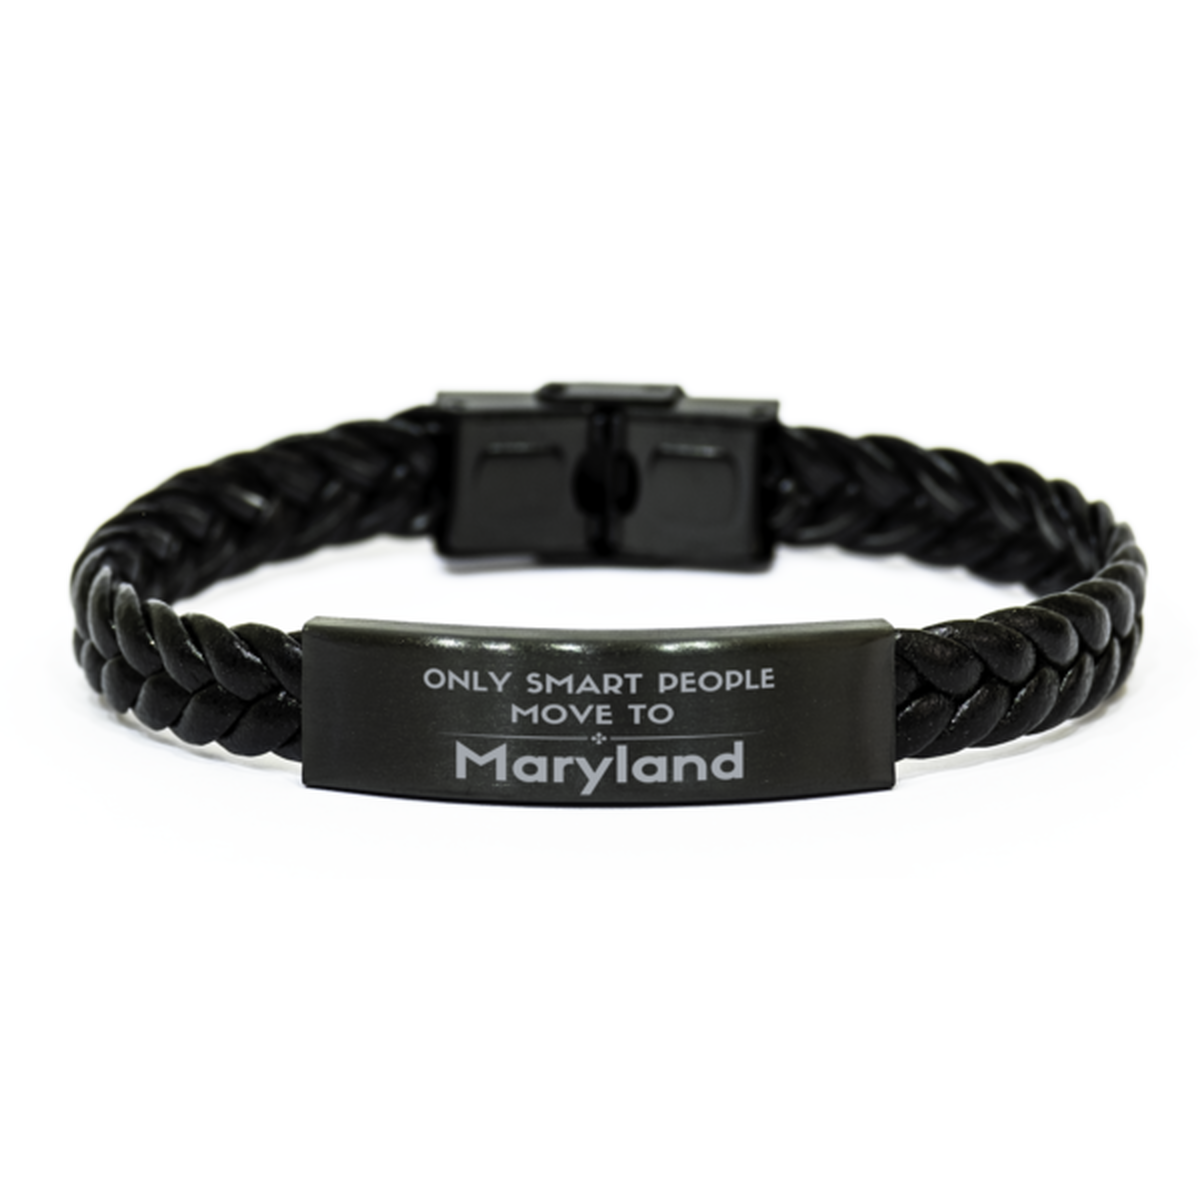 Only smart people move to Maryland Braided Leather Bracelet, Gag Gifts For Maryland, Move to Maryland Gifts for Friends Coworker Funny Saying Quote